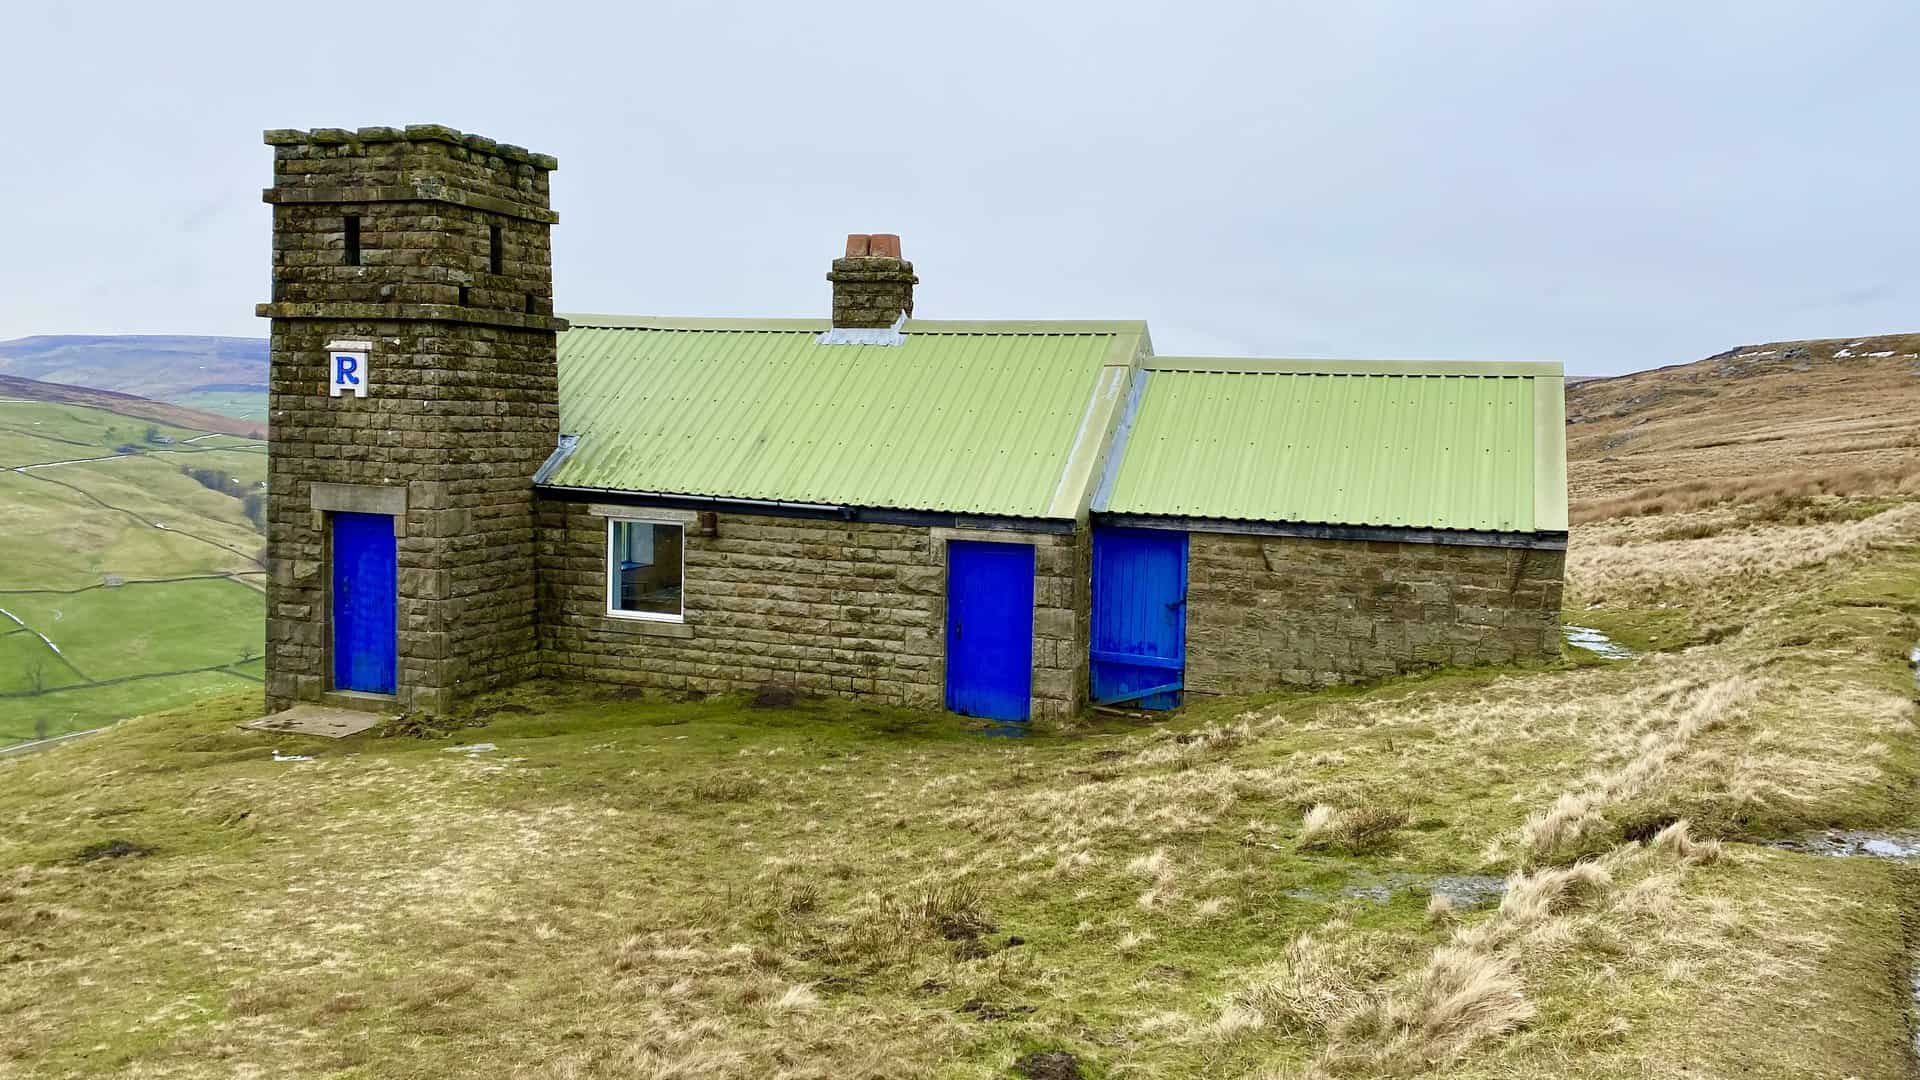 The shooting house above Thrope Edge on Lofthouse Moor, its bright green corrugated roof and vivid blue doors striking against the natural hues of the countryside.